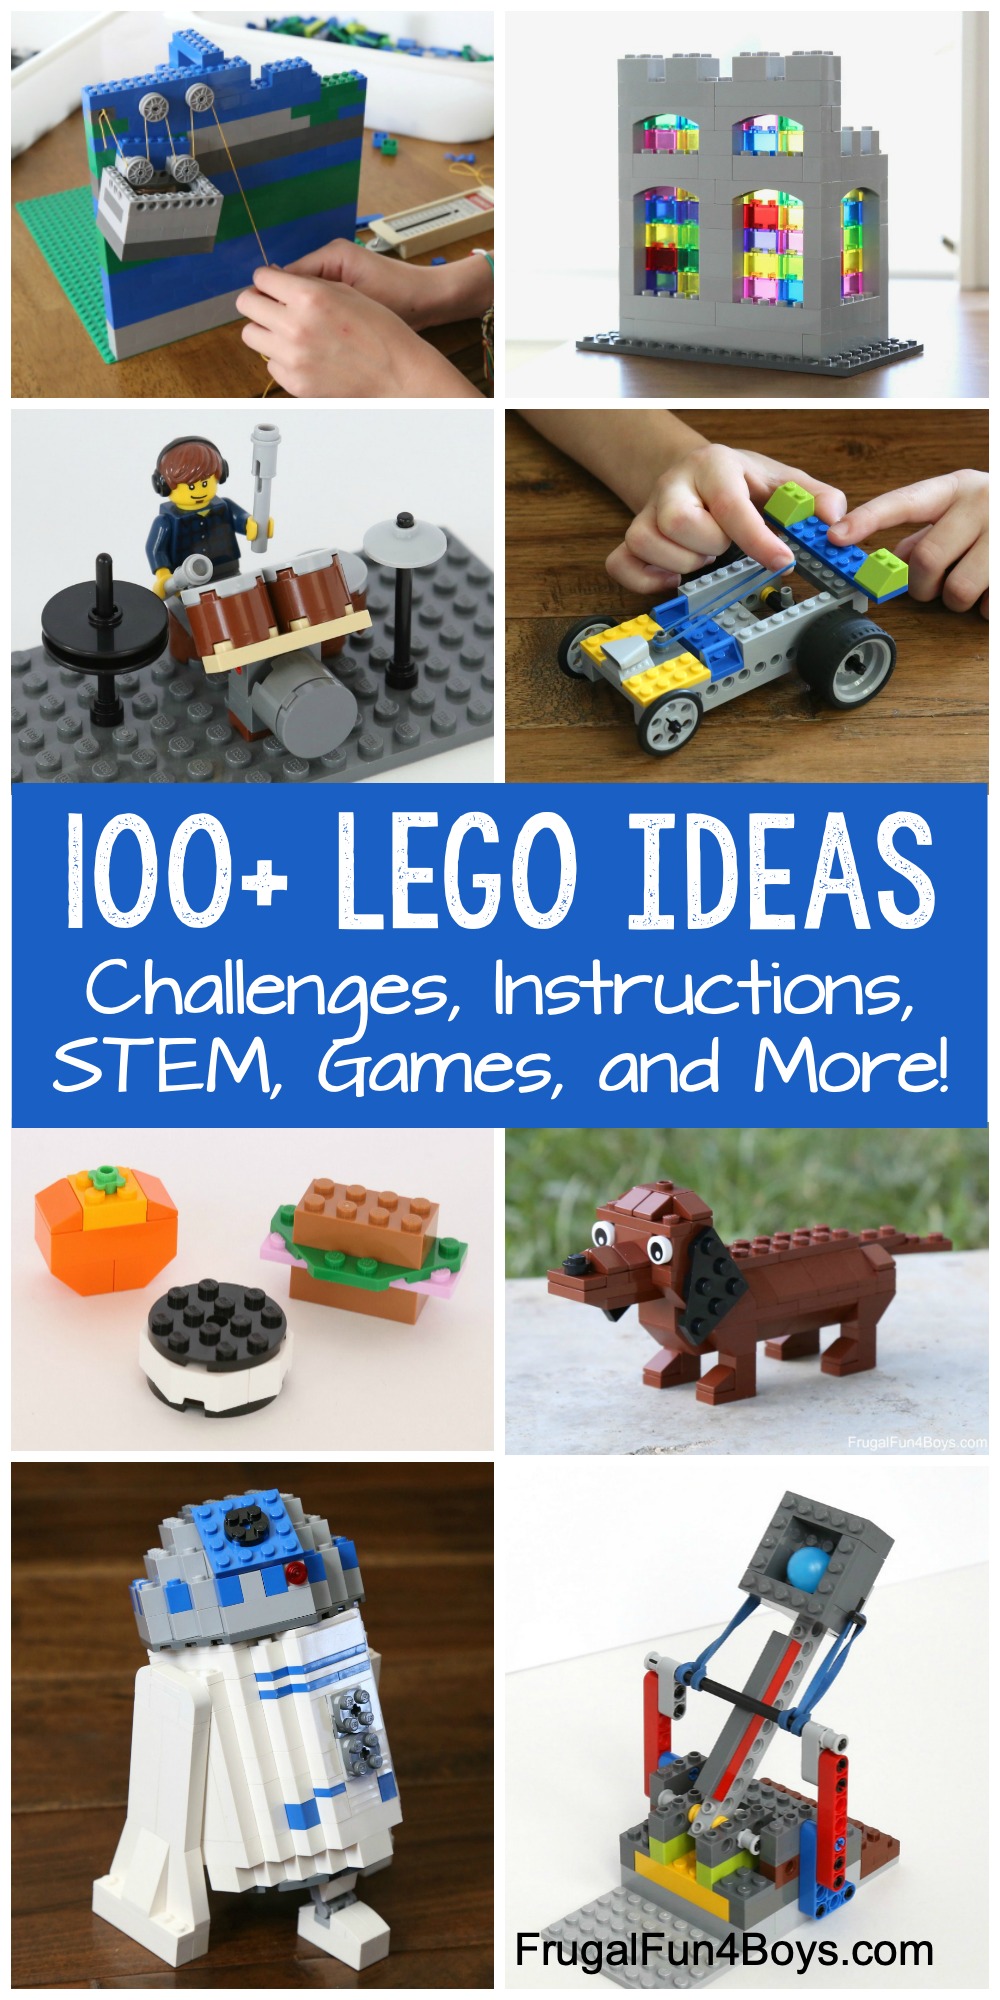 Dingy Teacher's day Father 100+ Lego Building Projects for Kids - Frugal Fun For Boys and Girls